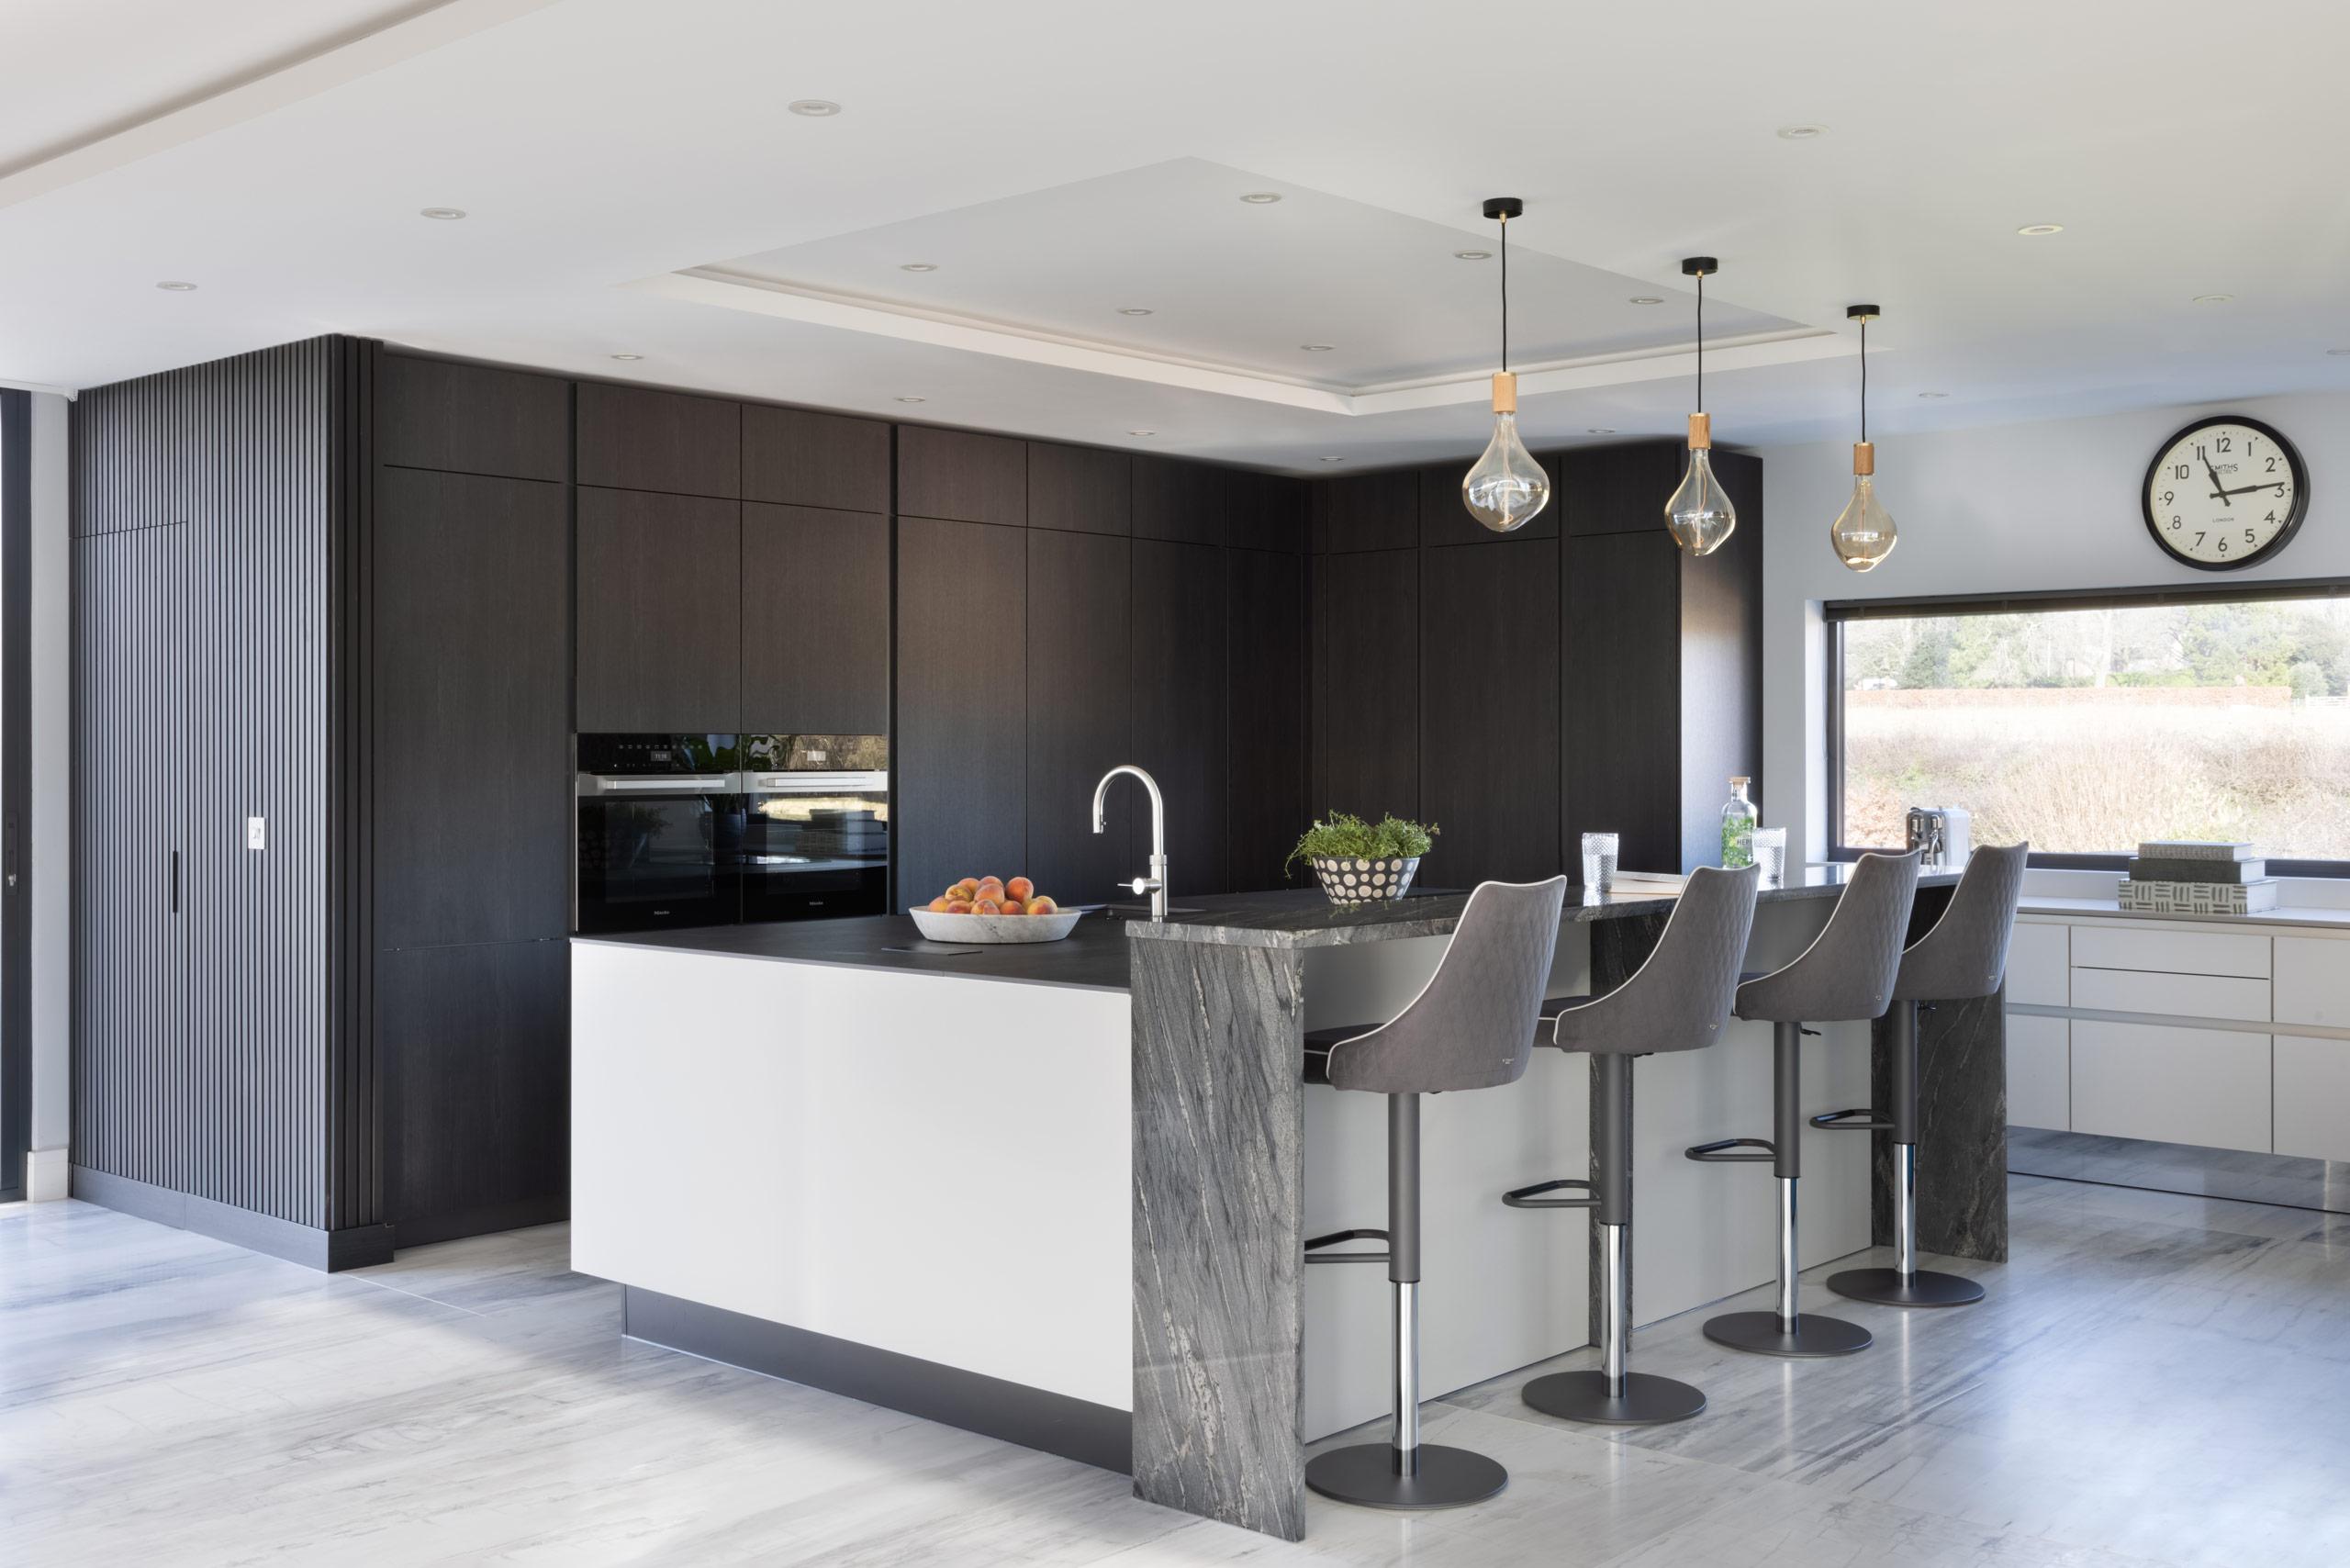 Lelliott angle kitchen | The Myers Touch